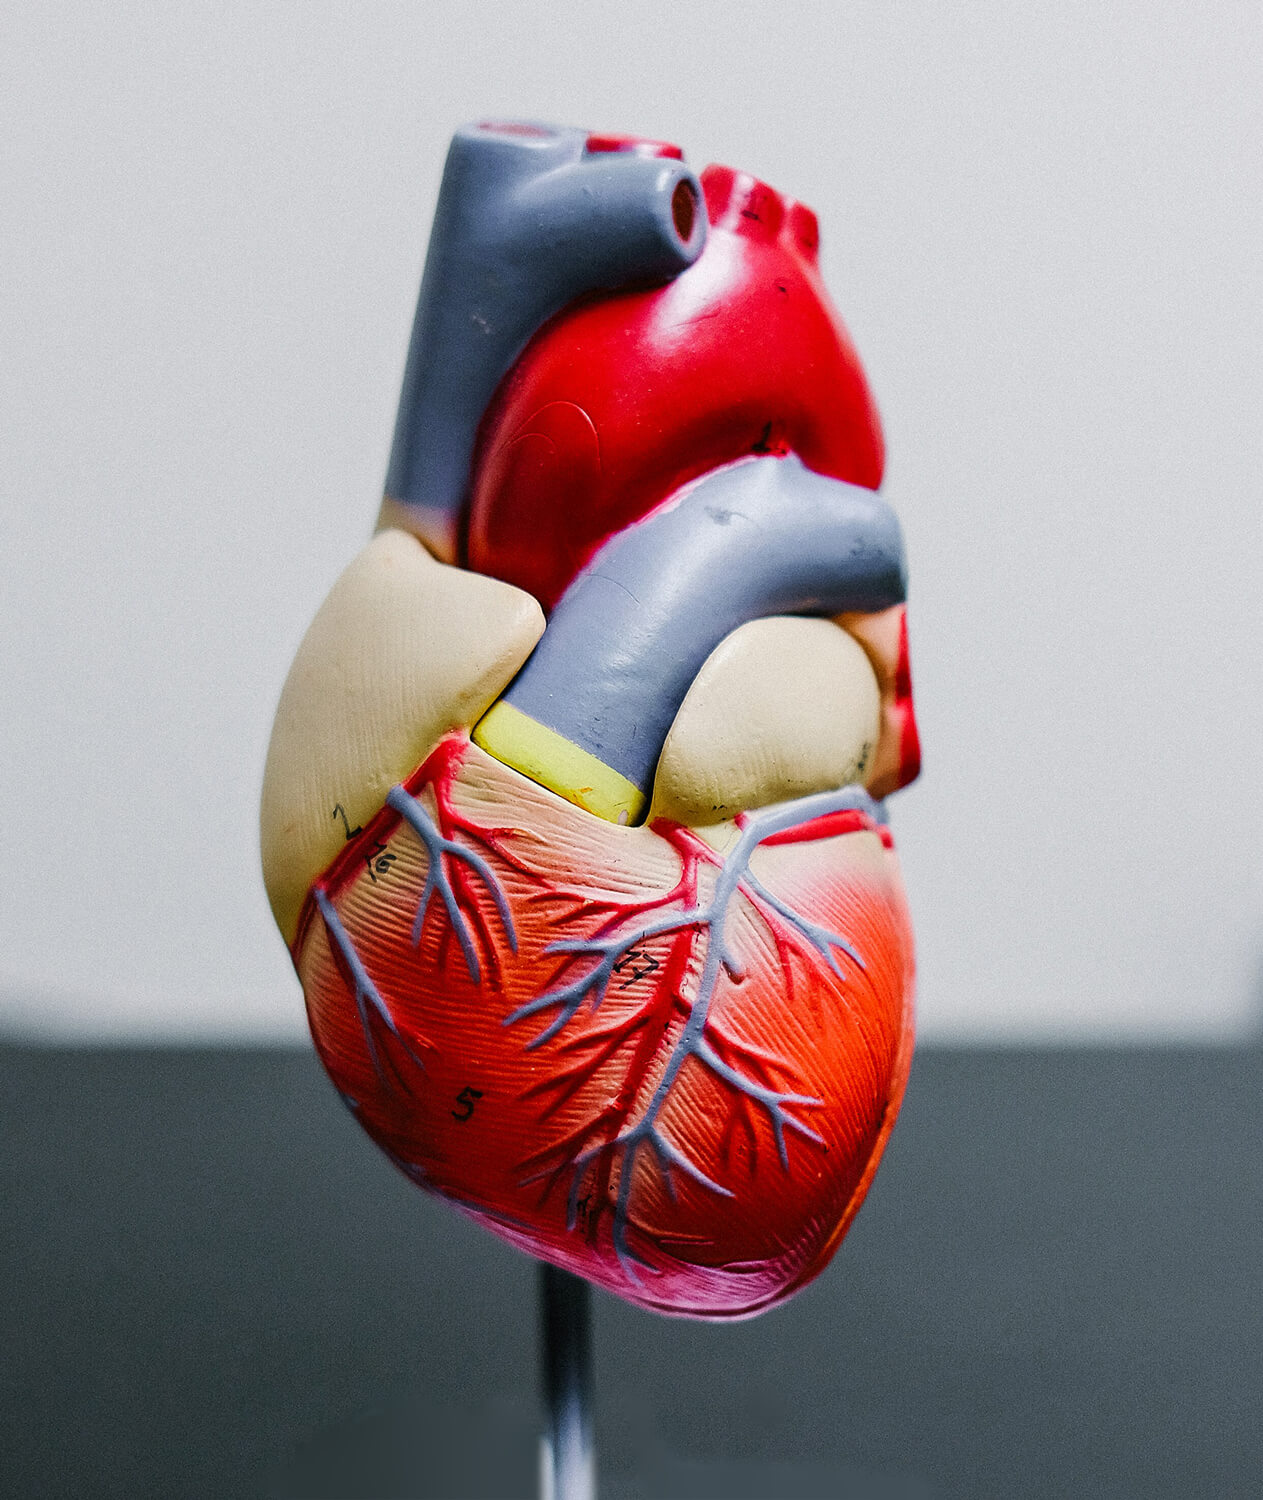 A model of a healthy heart